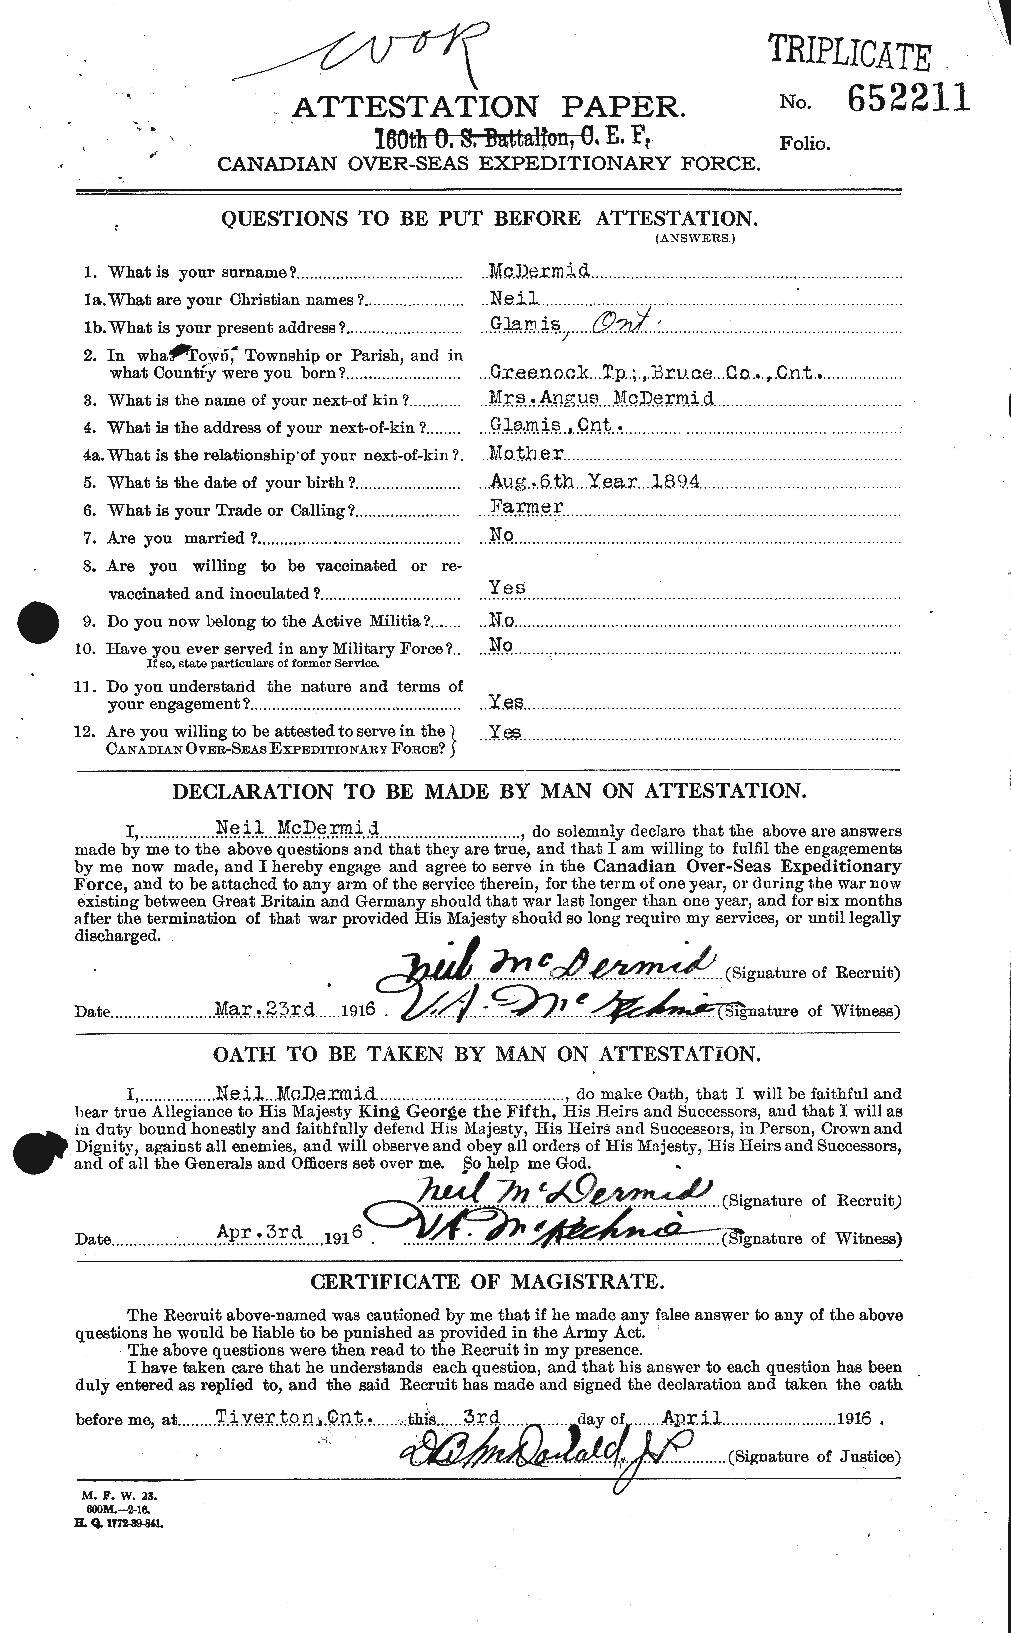 Personnel Records of the First World War - CEF 136132a